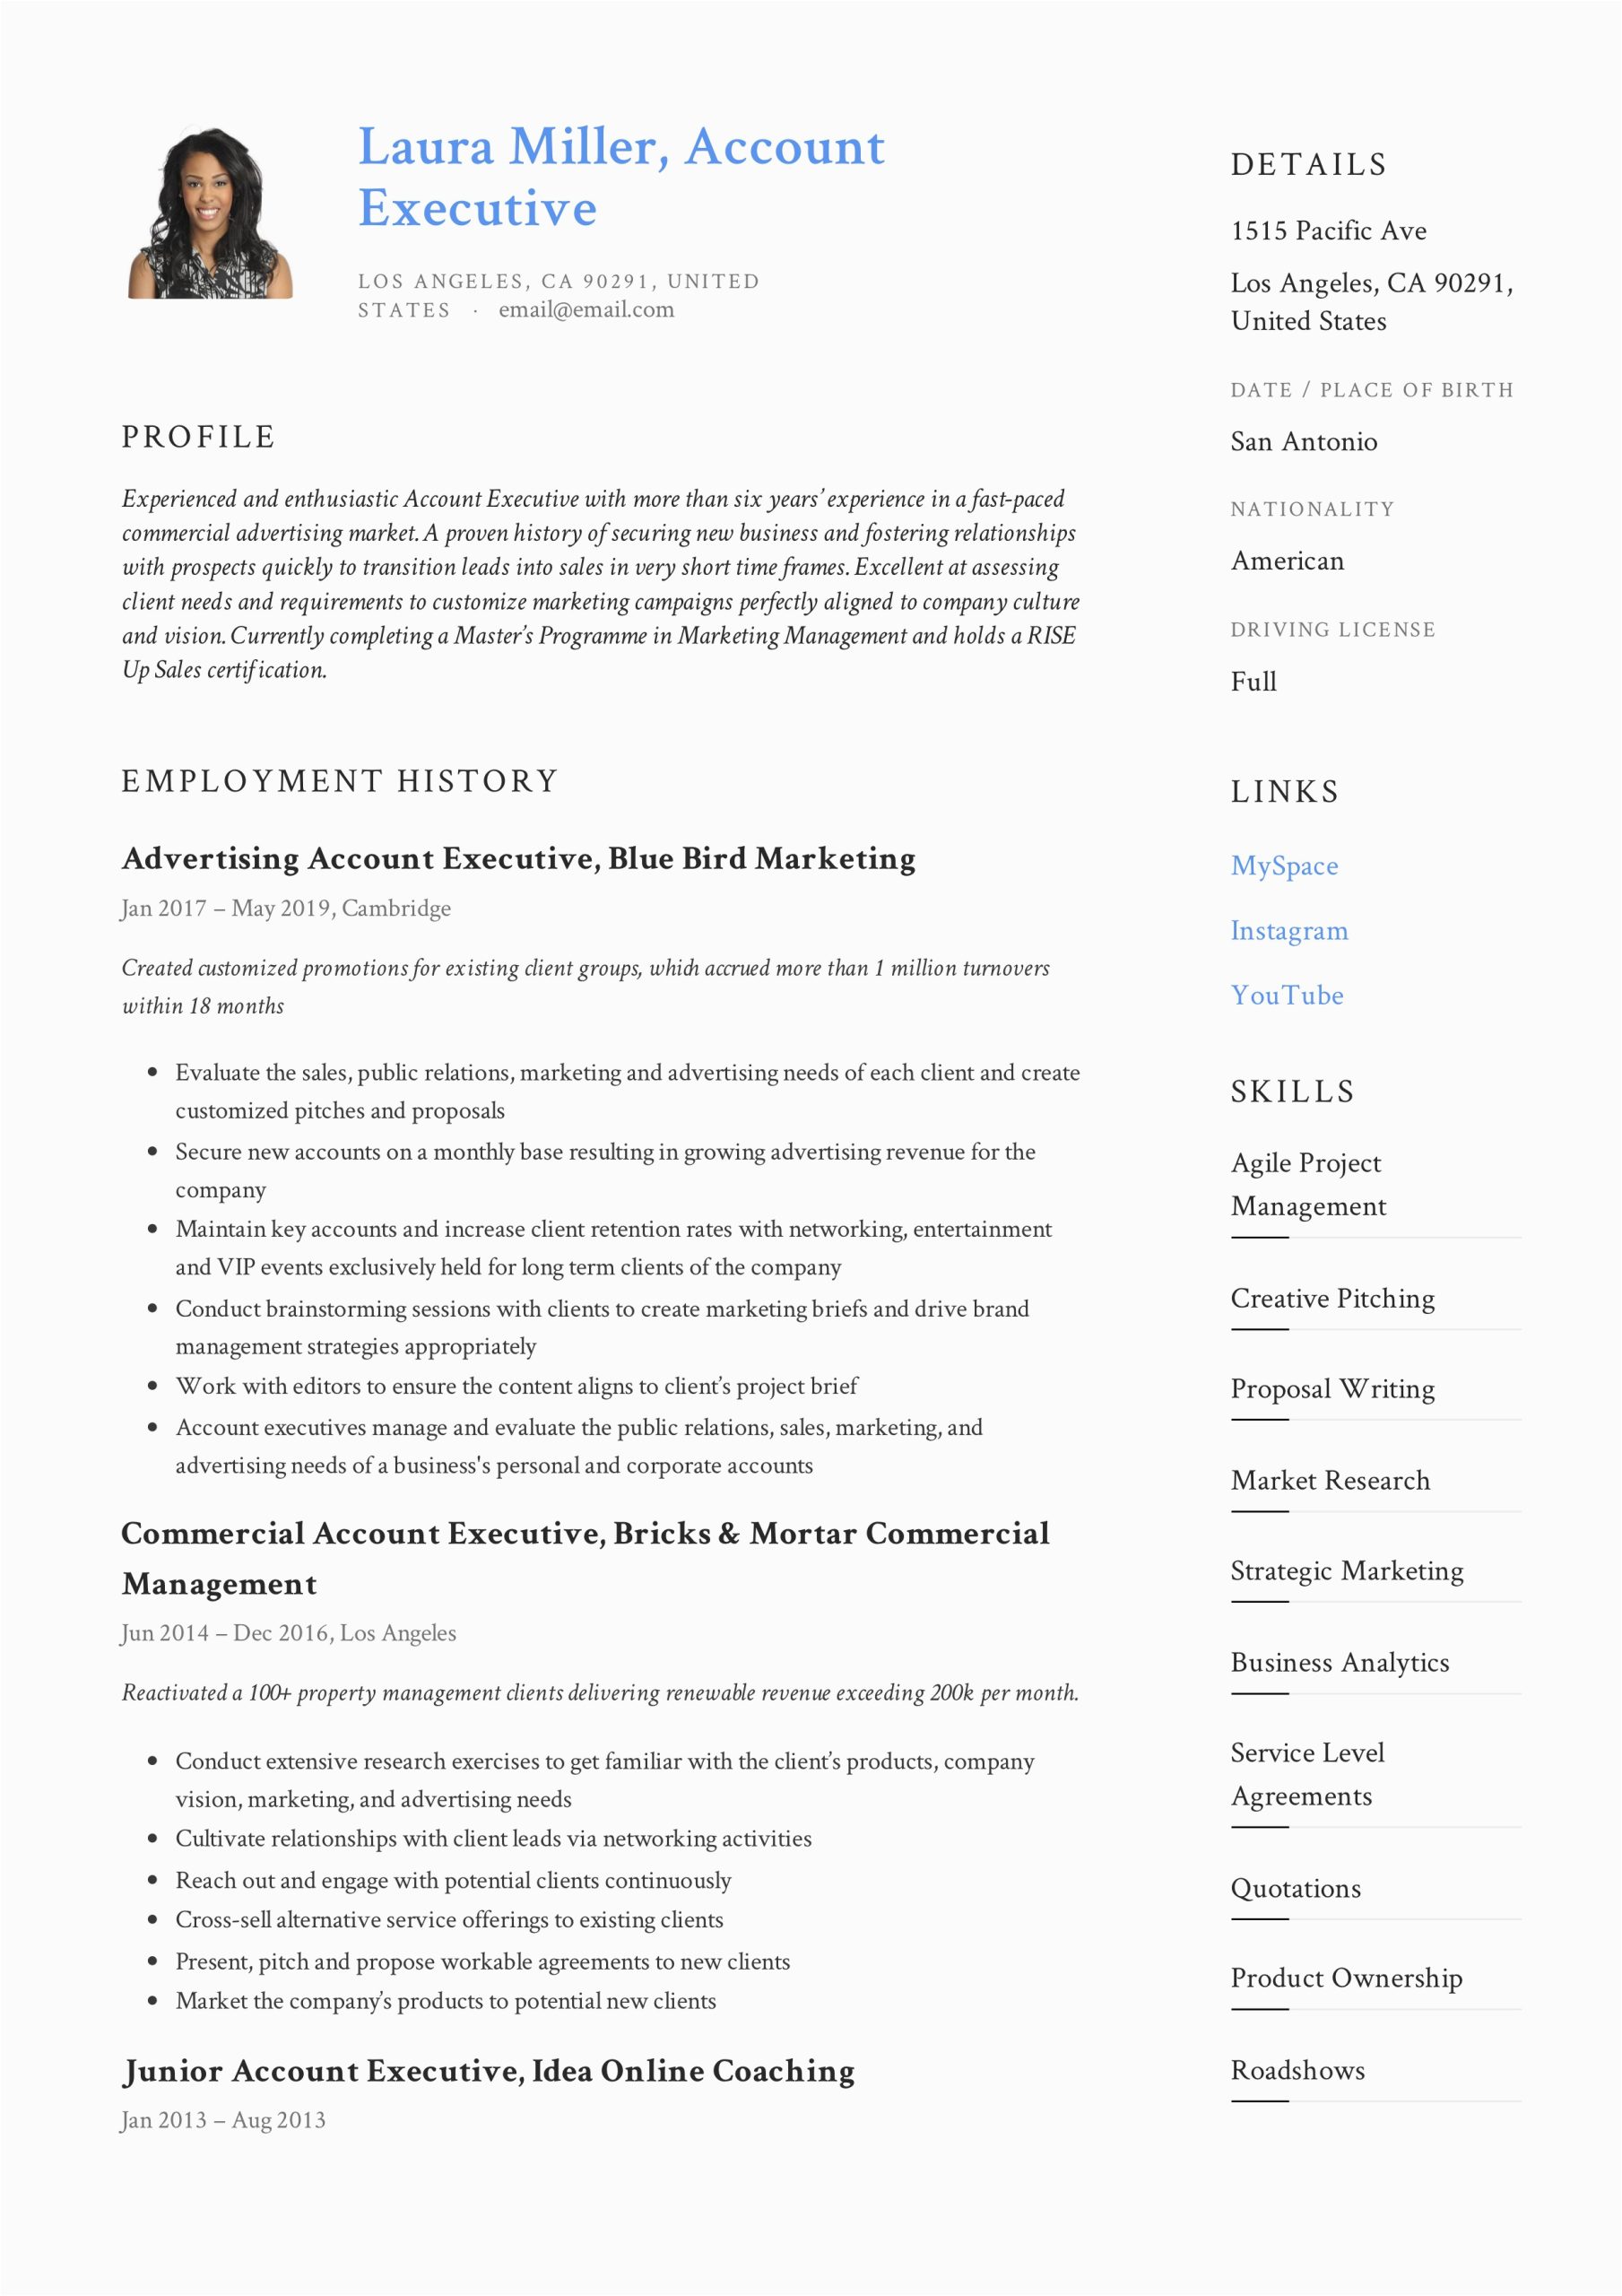 Make Your Pitch In Resume Sample Short and Engaging Pitch for Resume Teacher Resume Sample